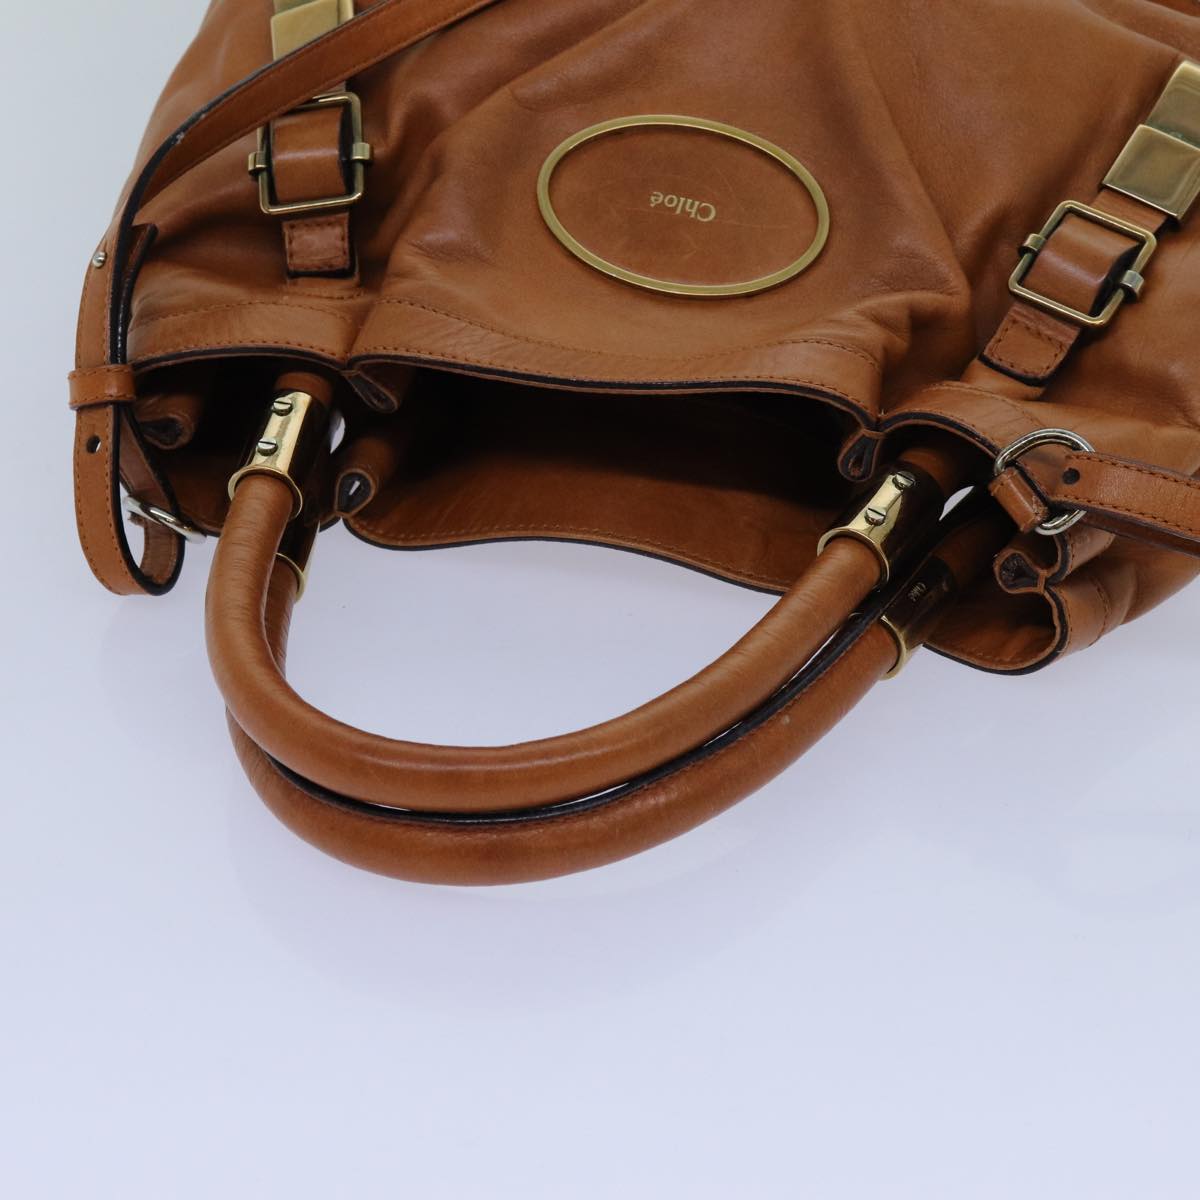 Chloe Victoria Hand Bag Leather 2way Brown Auth yk11966